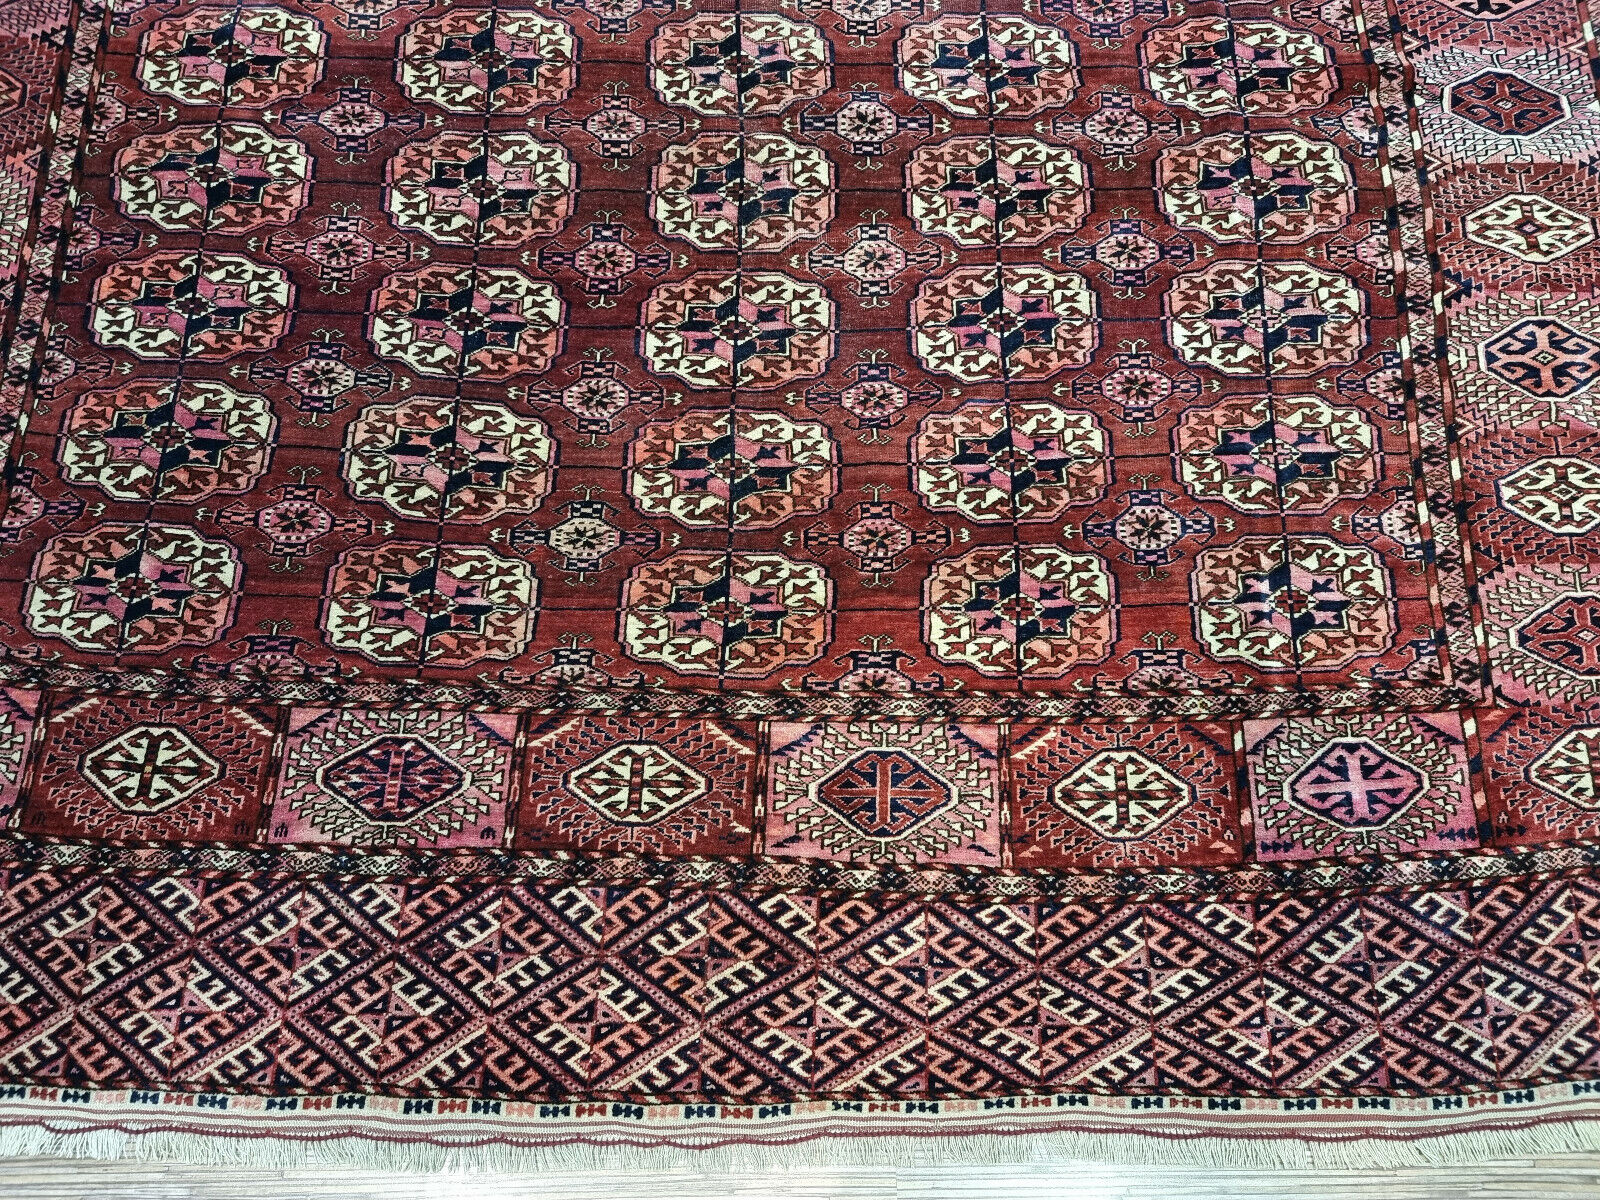 Close-up of well-preserved appearance on Handmade Antique Turkmen Tekke Rug - Detailed view showcasing the well-preserved condition of the rug despite its age.